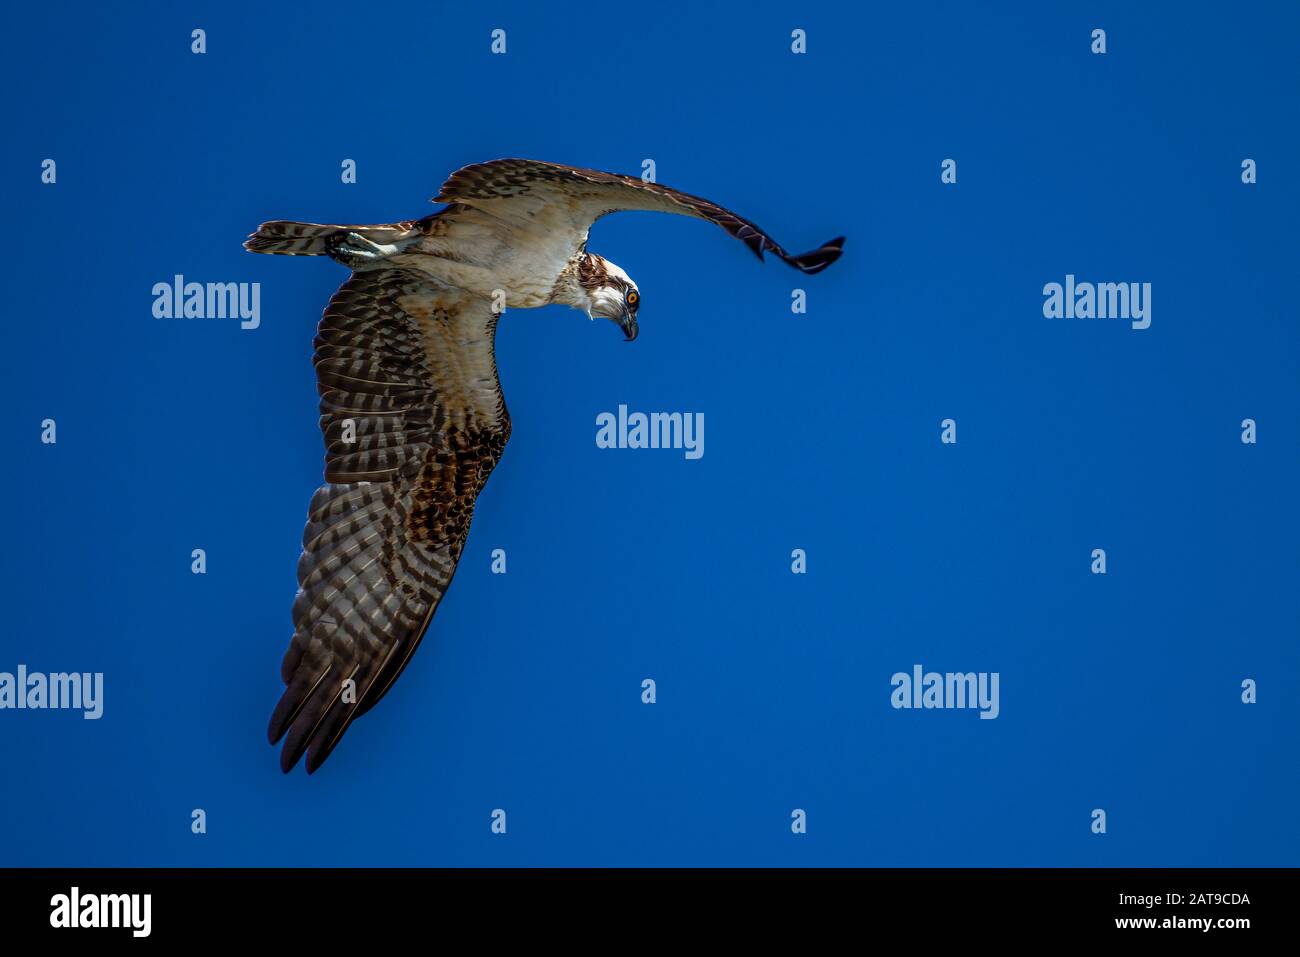 Osprey raptor in flight with blue sky background image takenn along the Pacific coast of Panama Stock Photo